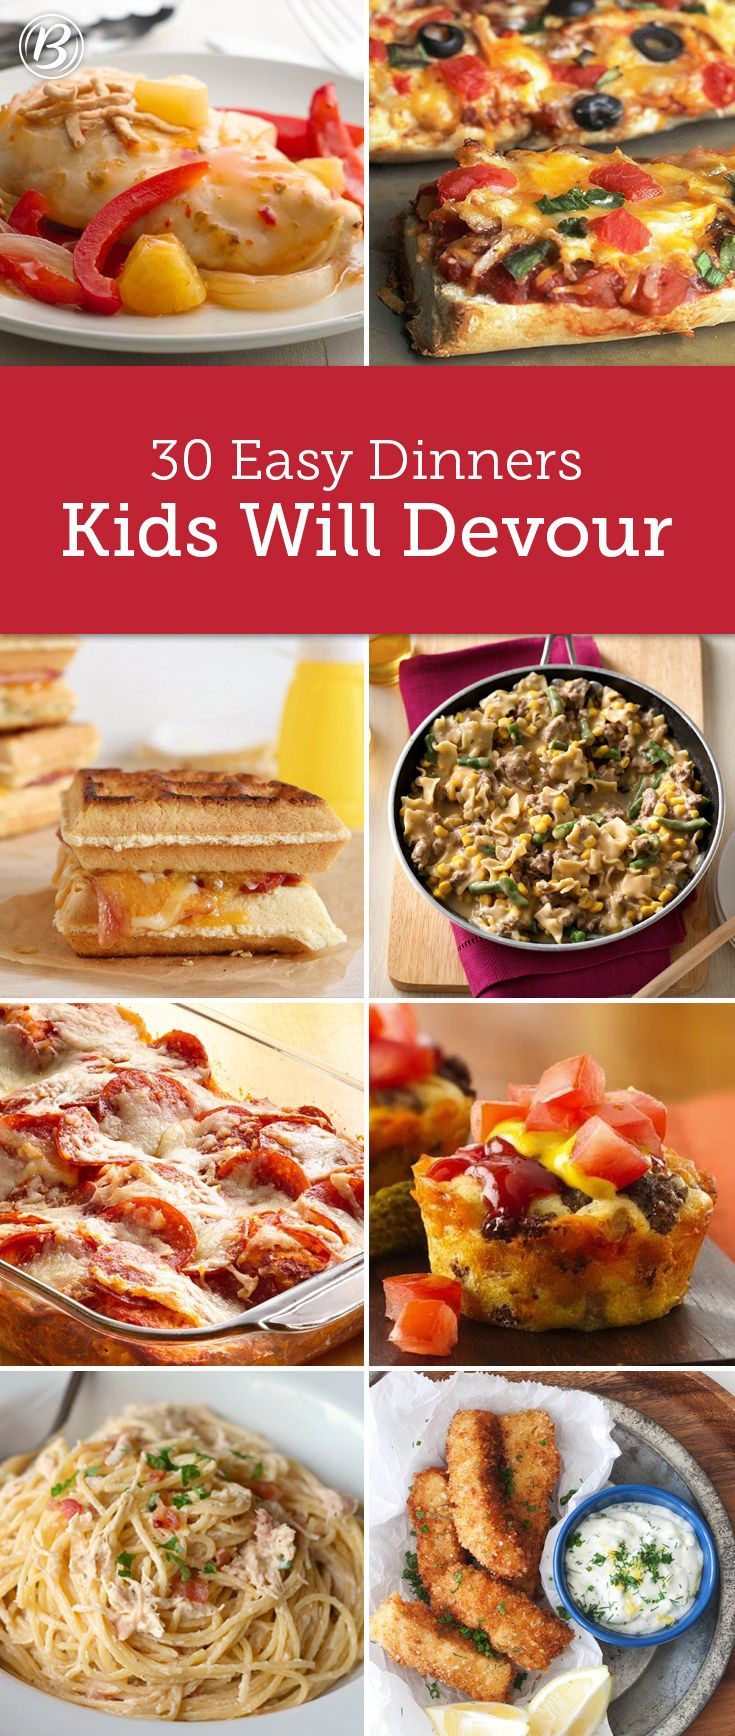 Fast Kid Friendly Dinners
 Kids’ Most Requested Dinners Family Dinners